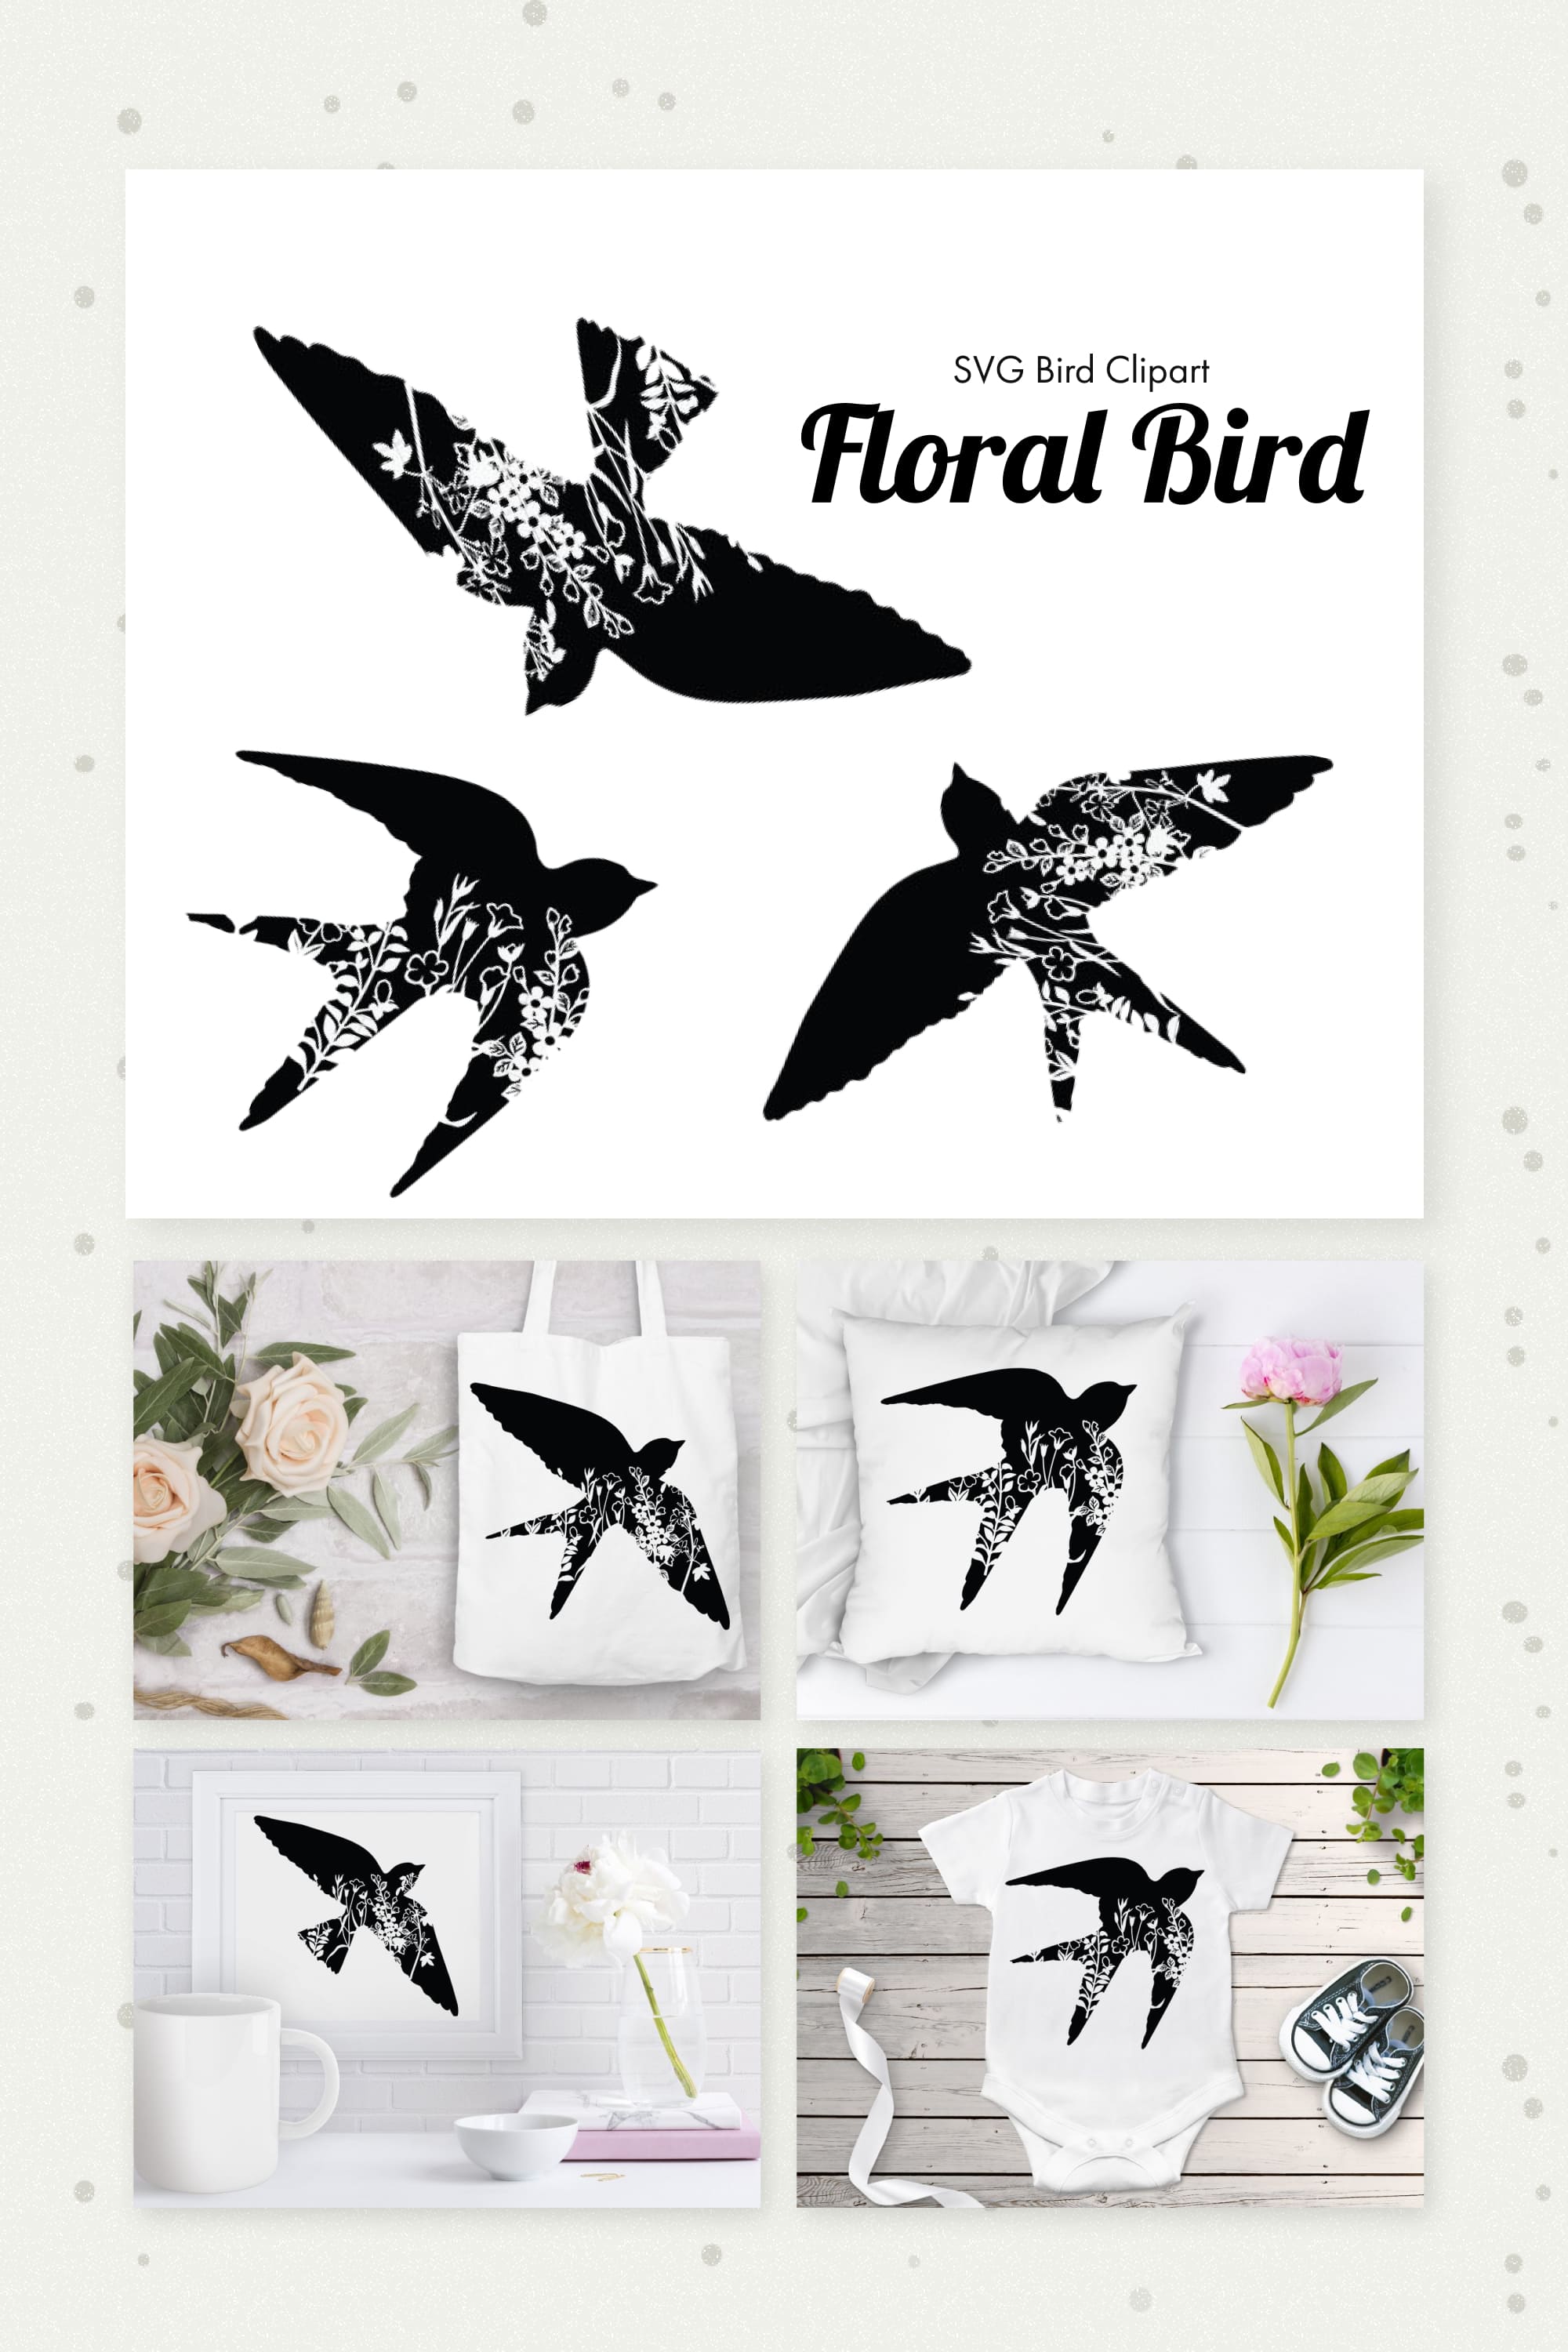 Collage of black and white images of birds.